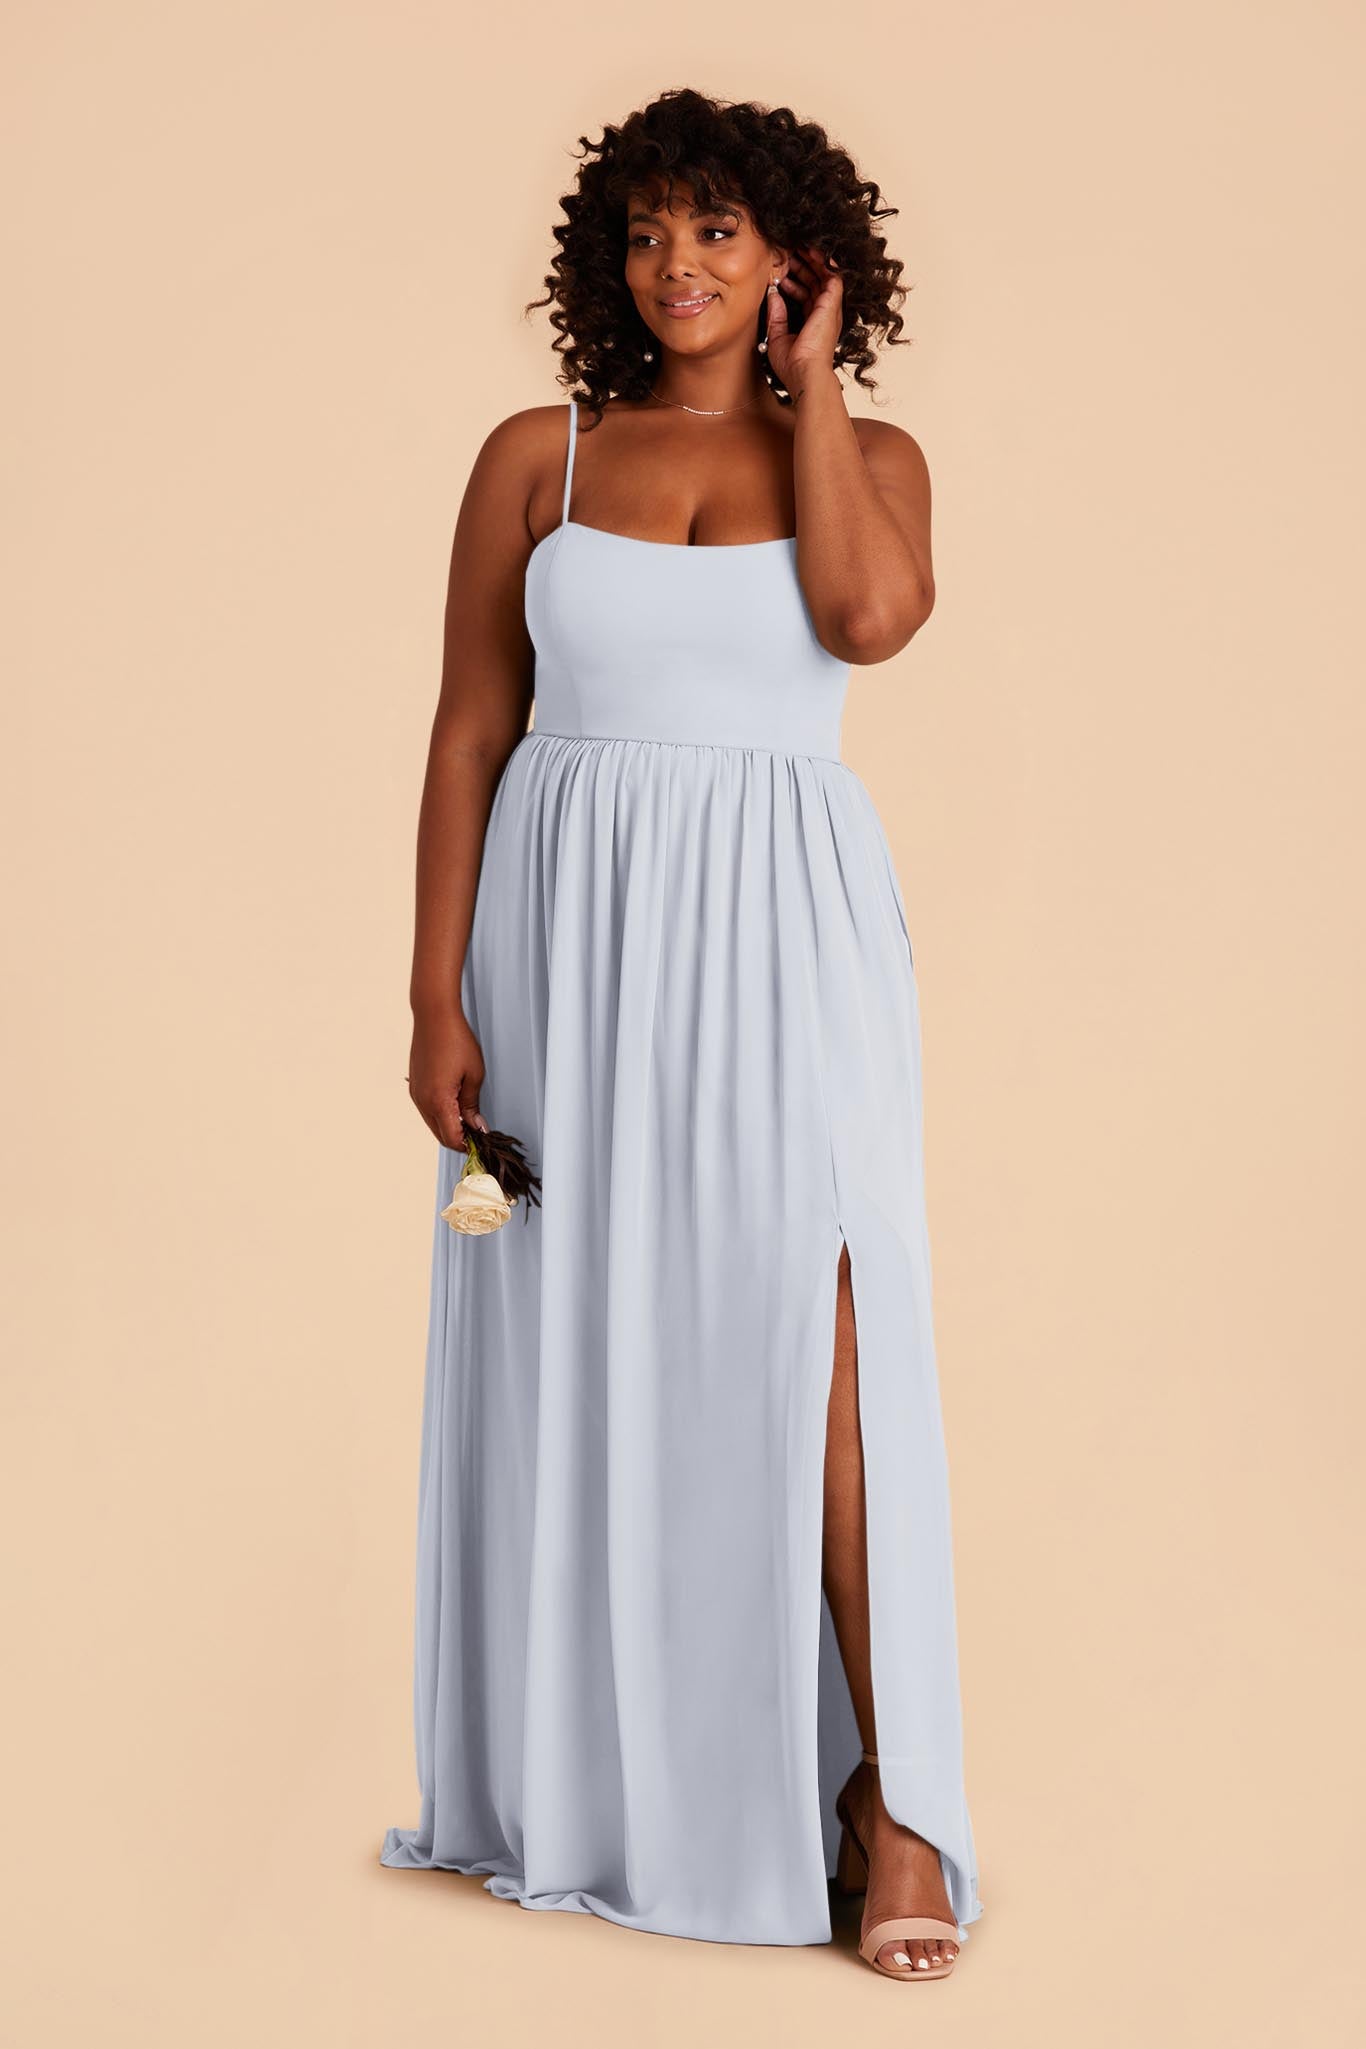 August Ice Blue Convertible Dress by Birdy Grey